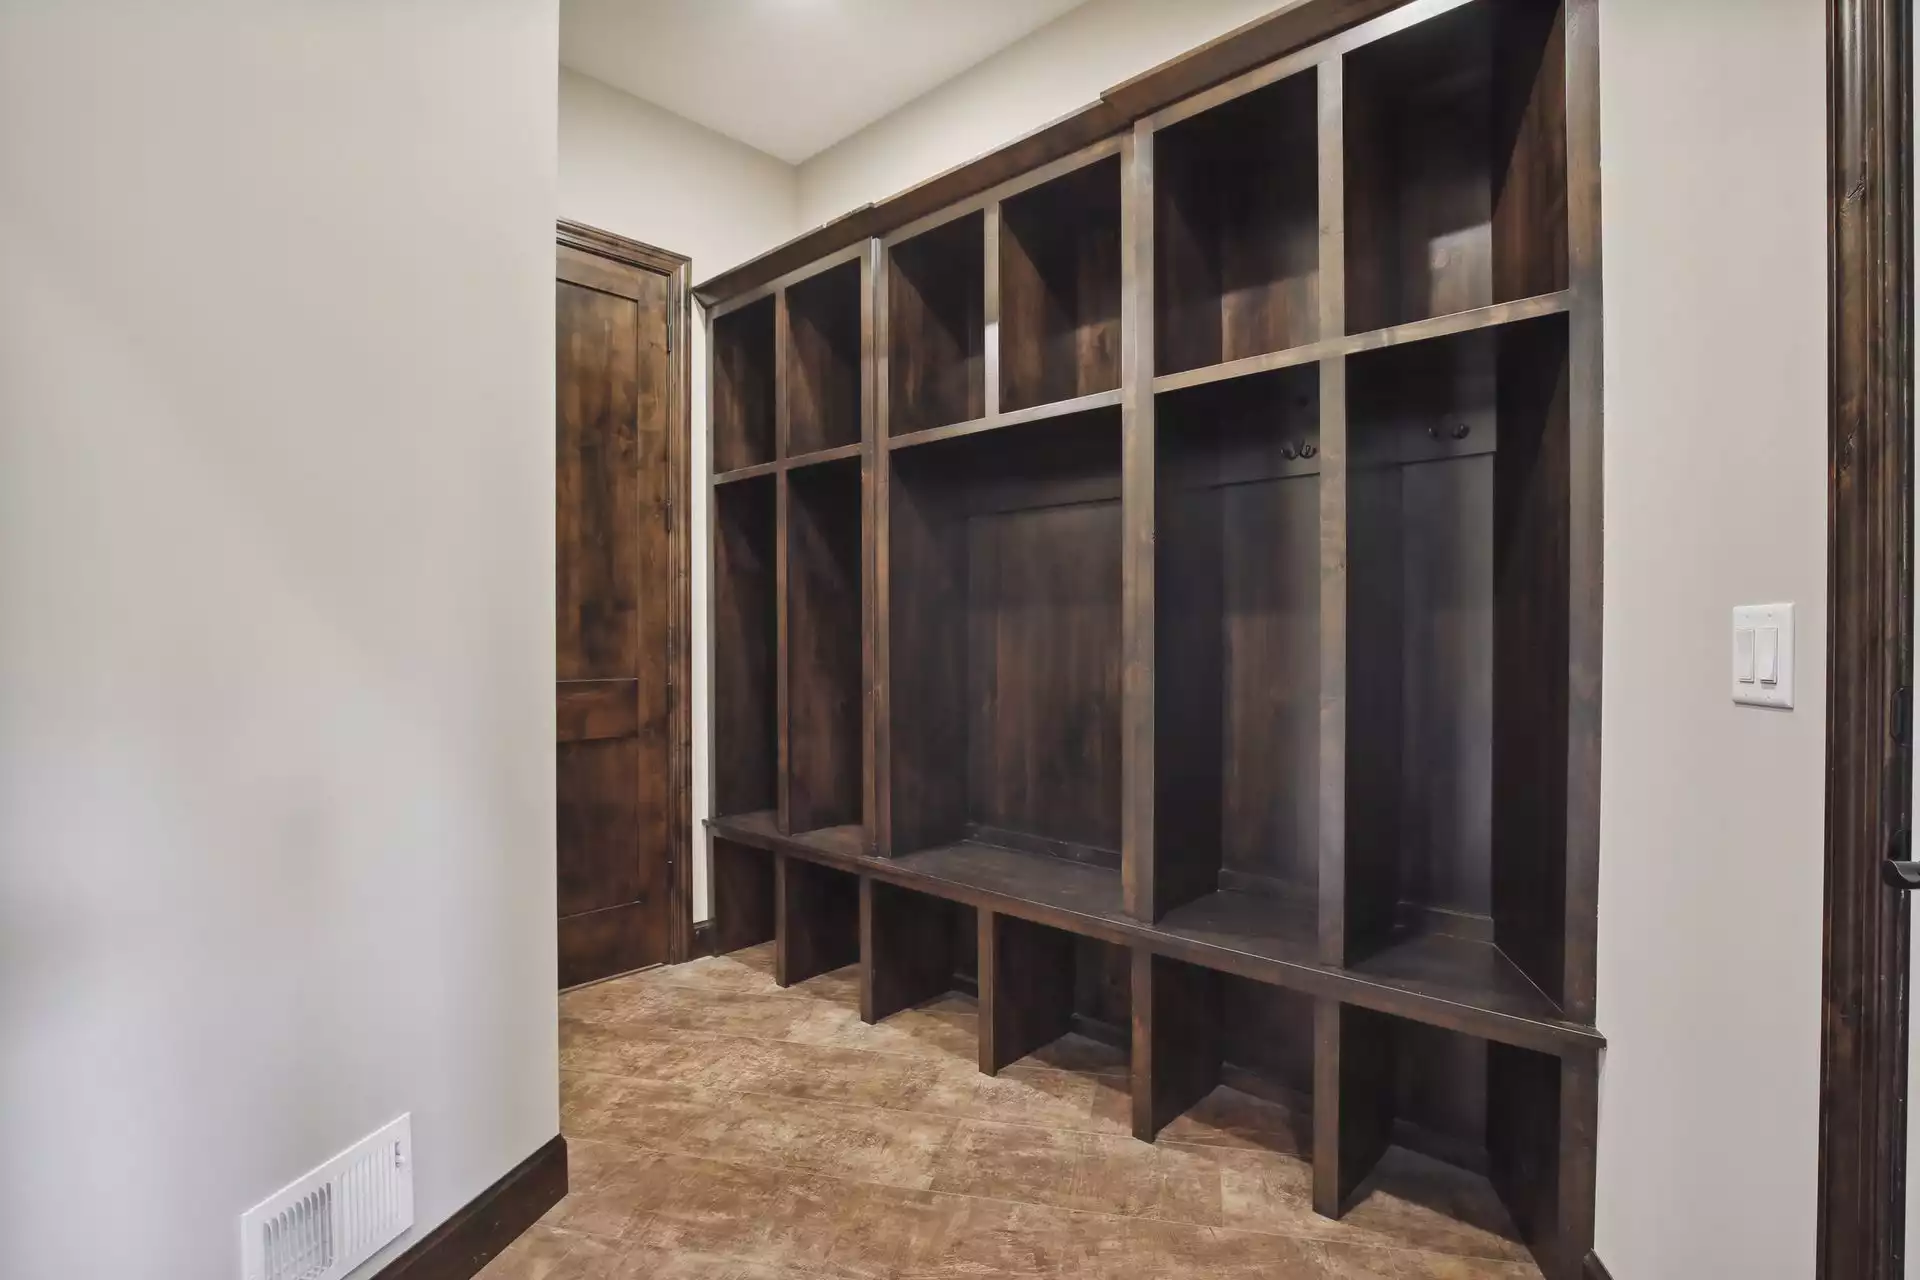 Lots of Built-in Cubby Storage